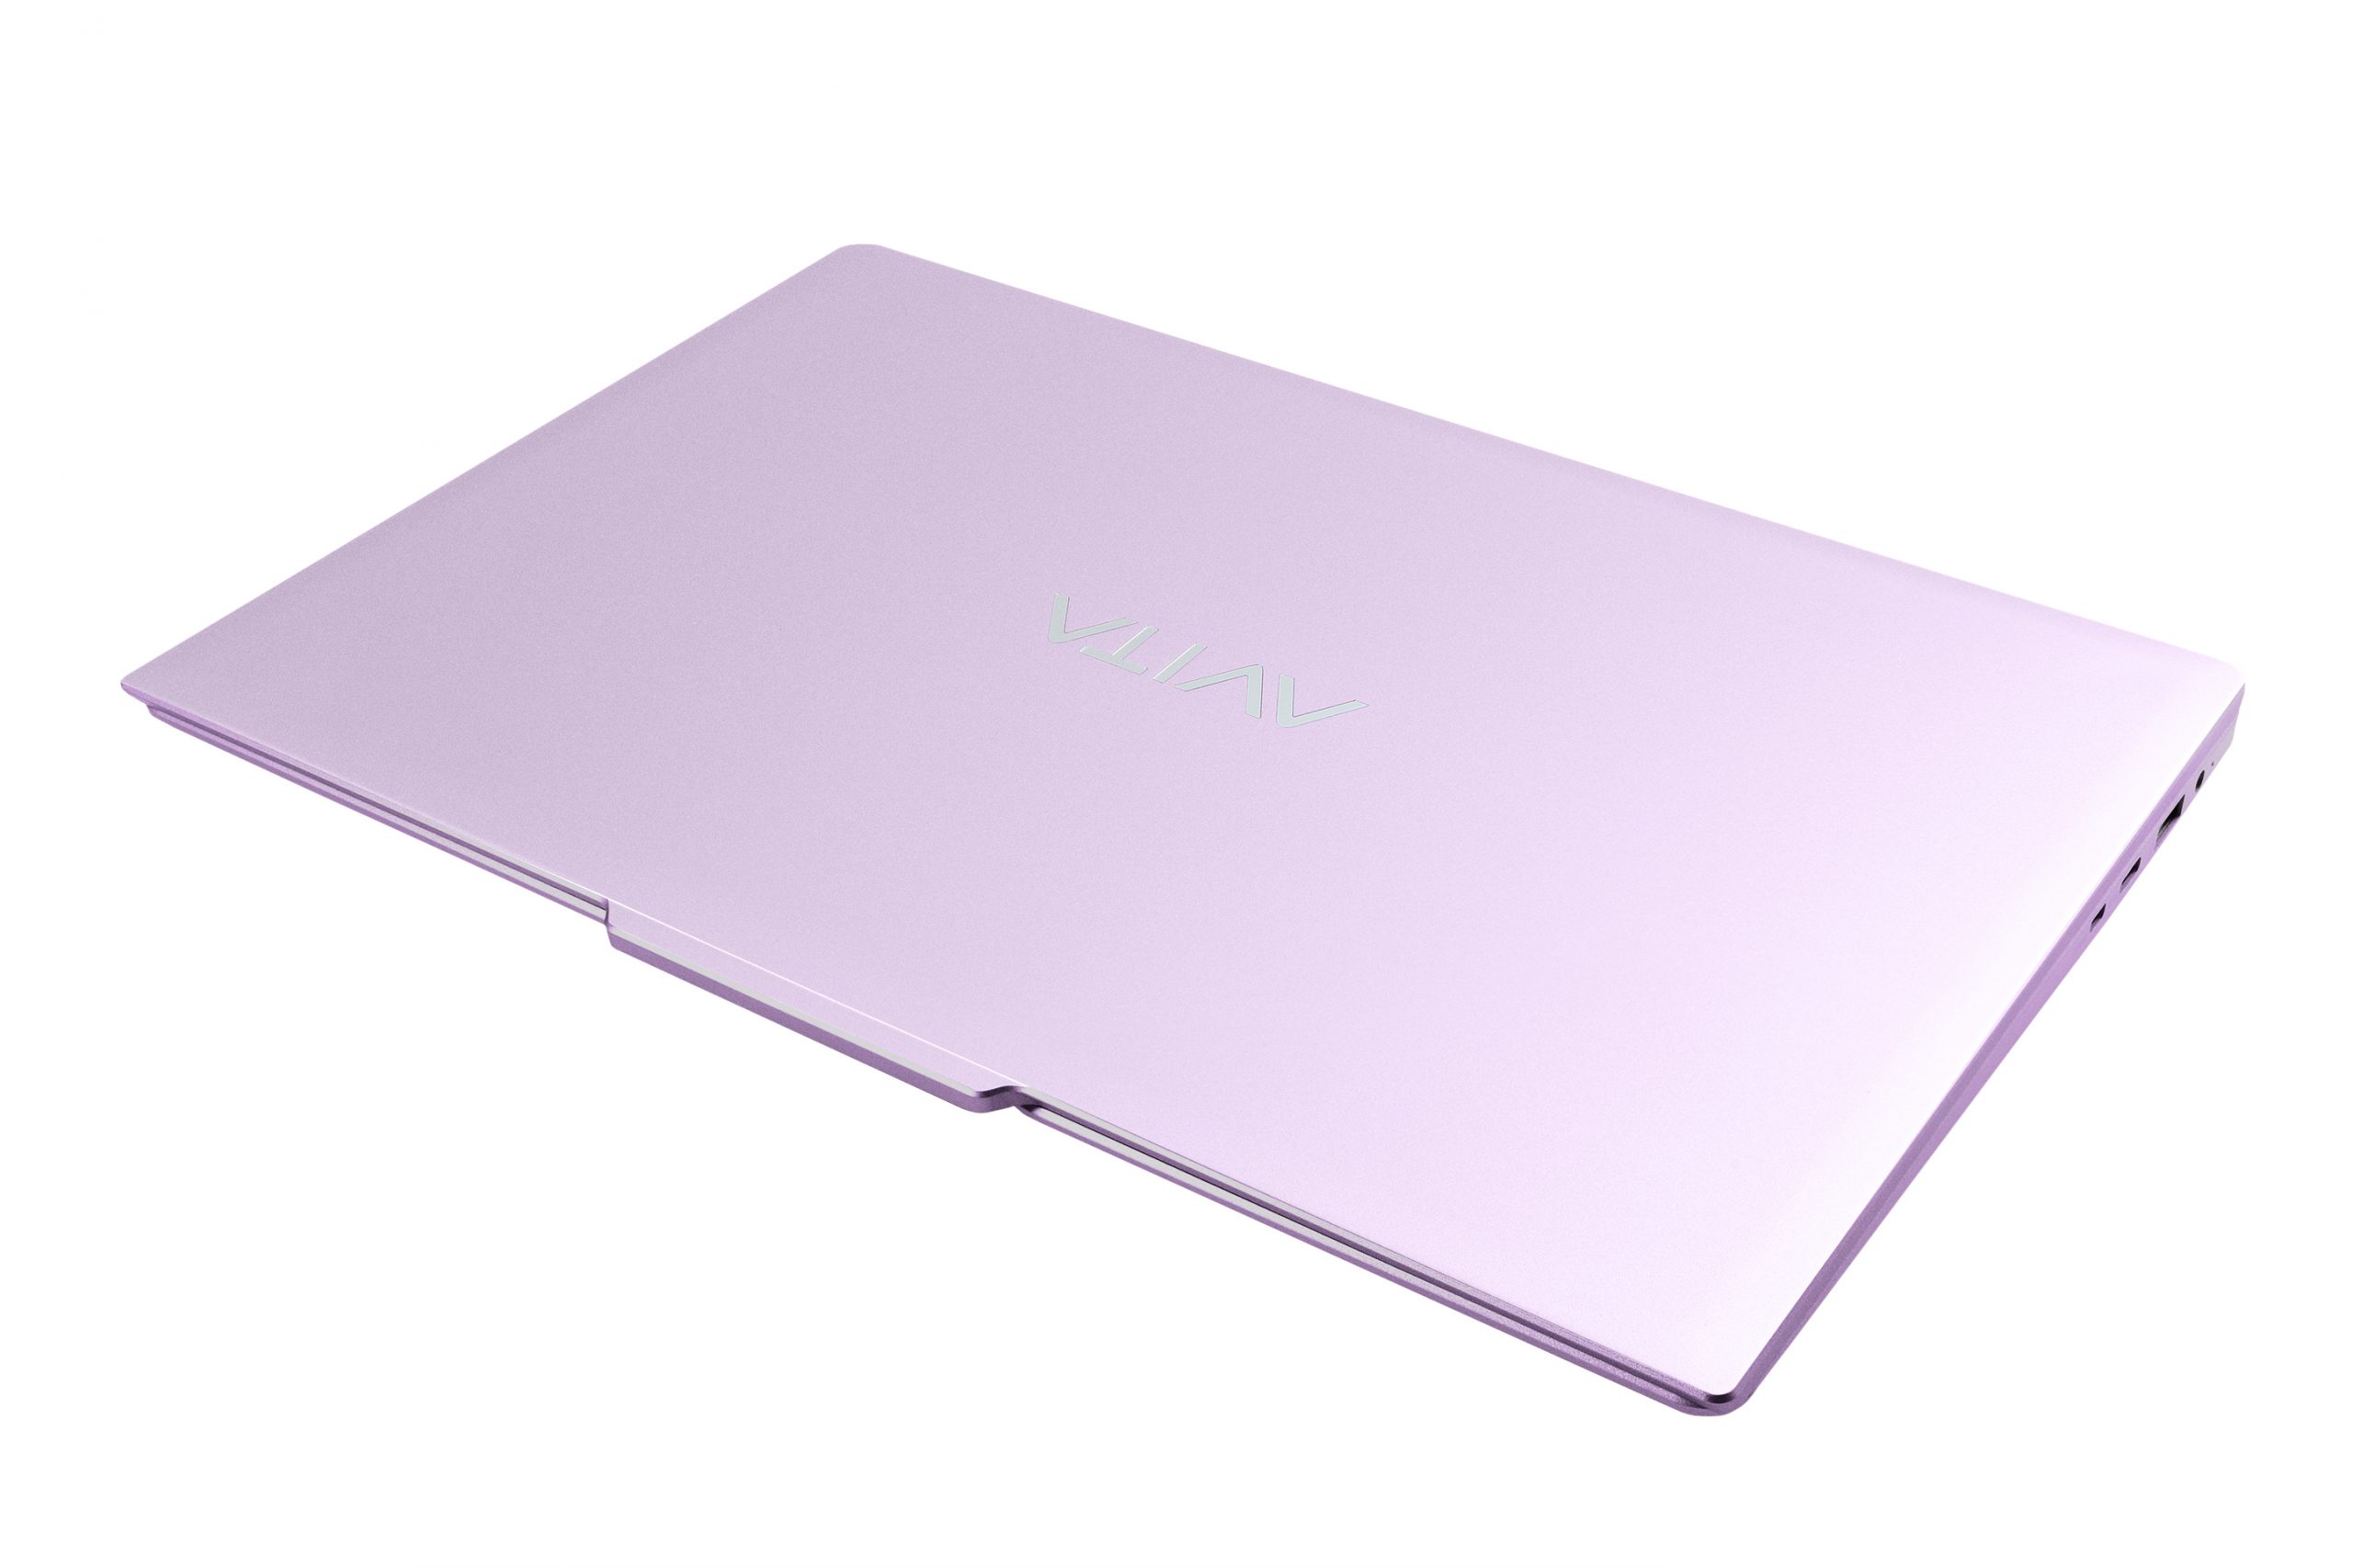 https://t2qwifi.com/wp-content/uploads/2020/07/avita_laptop_2020_angle5_0088_high_fragrant-lilac-scaled.jpg